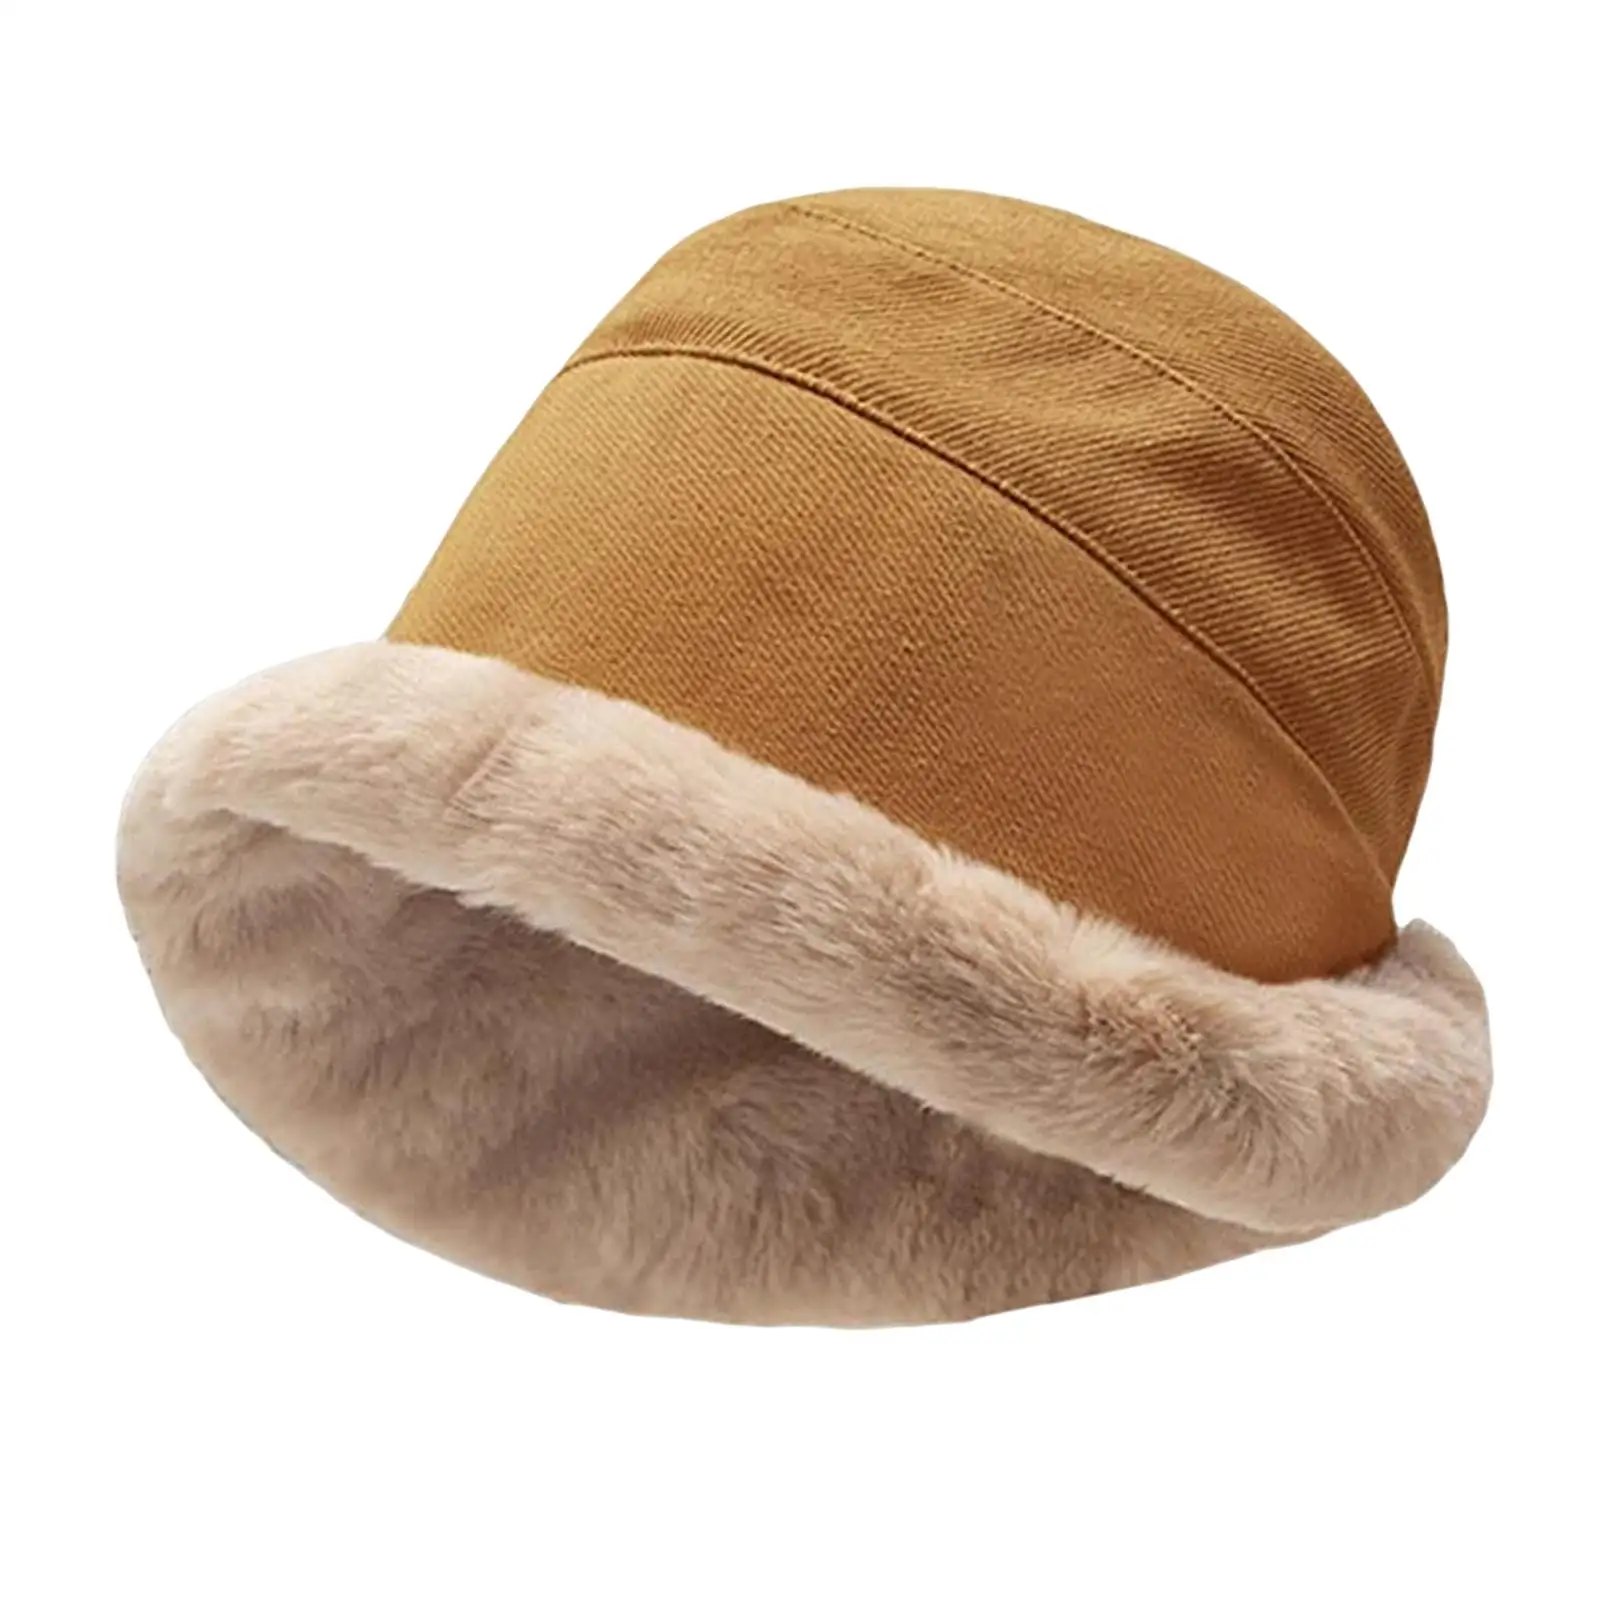 Winter Bucket Hat Casual Comfortable Fashion Solid Color Windproof Plush Warm Soft for Ladies Girls